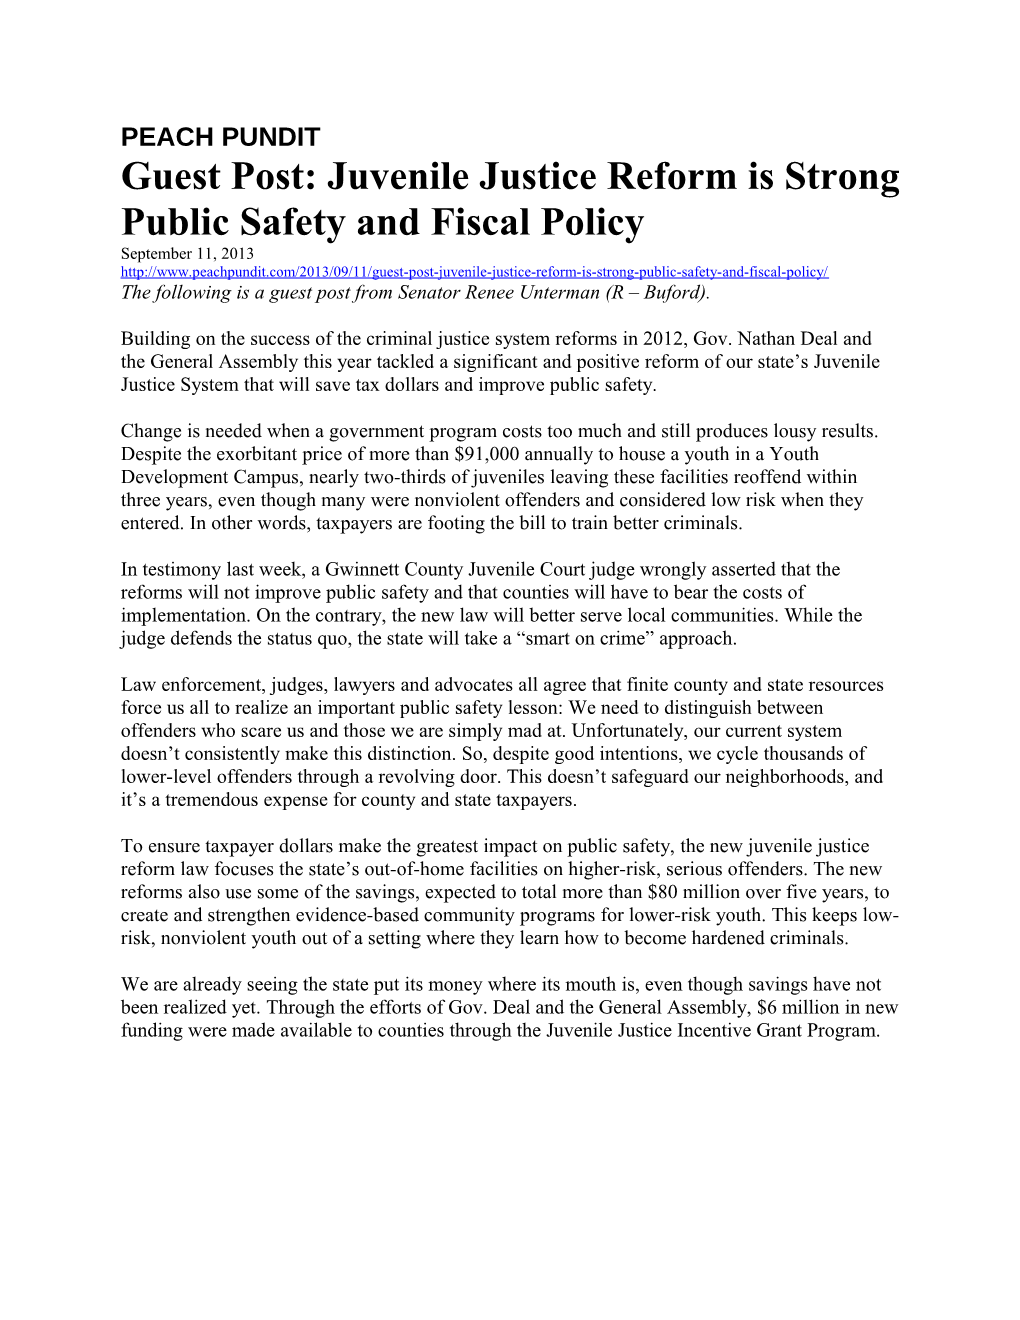 Guest Post: Juvenile Justice Reform Is Strong Public Safety and Fiscal Policy